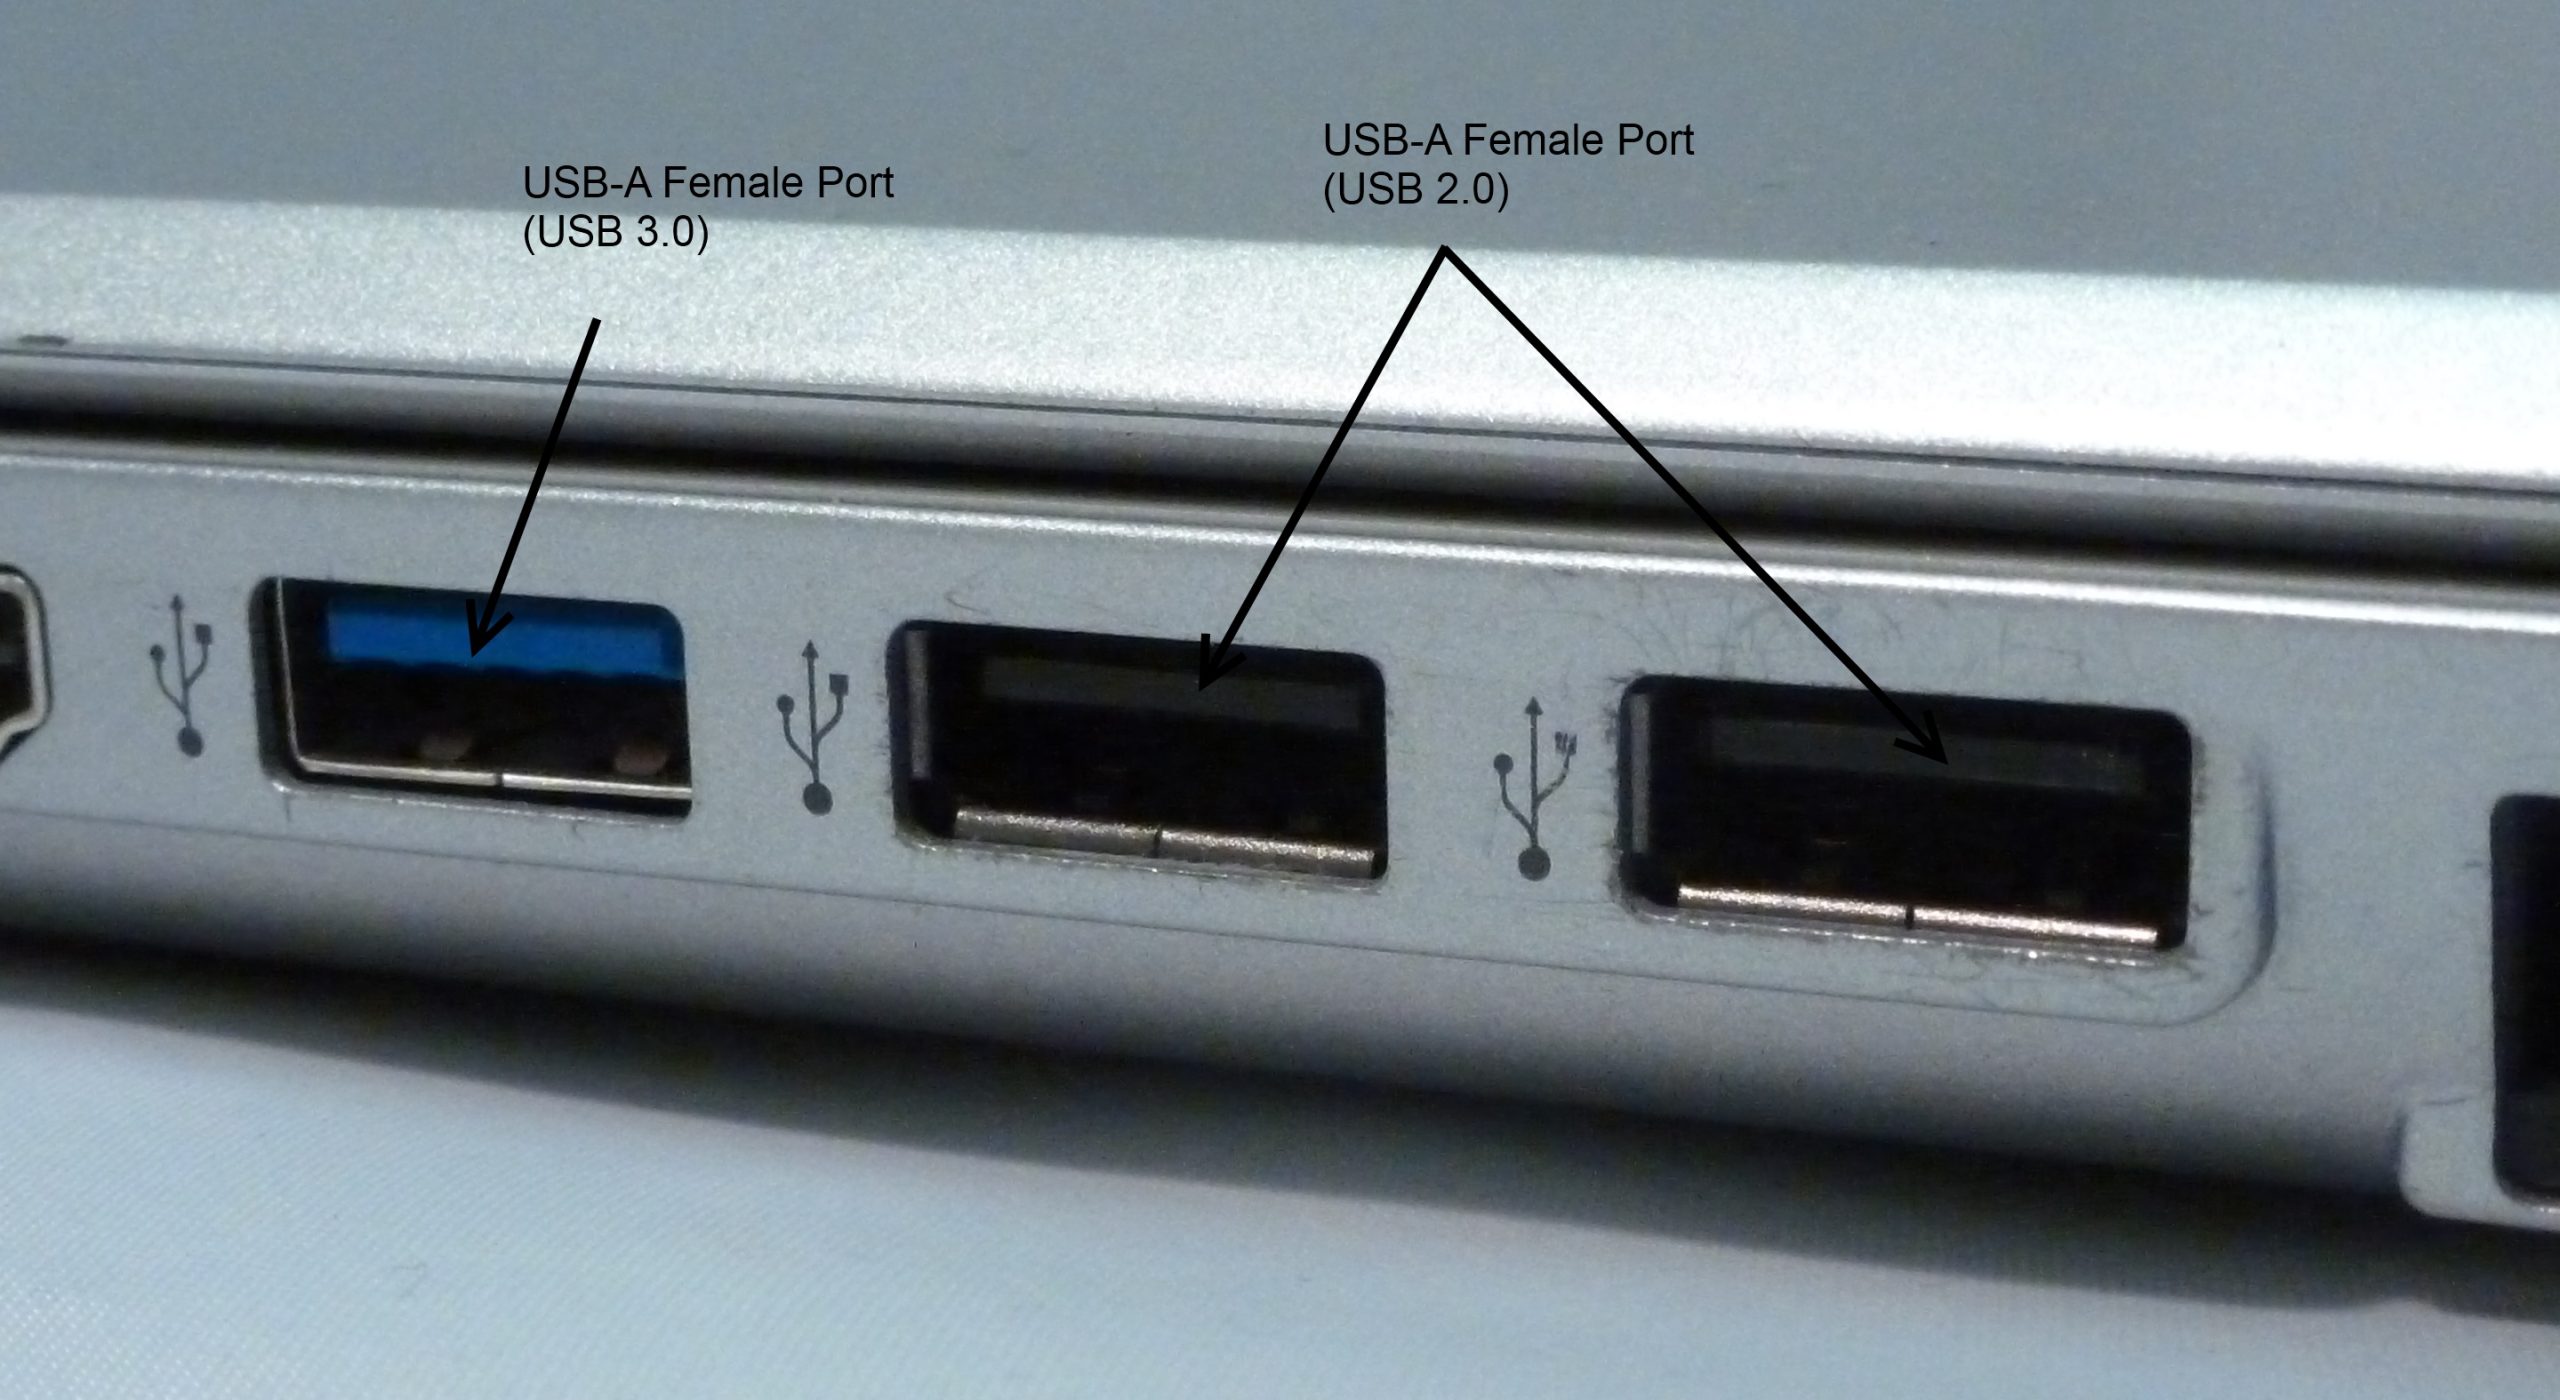 Check the USB head and USB connection port on the computer